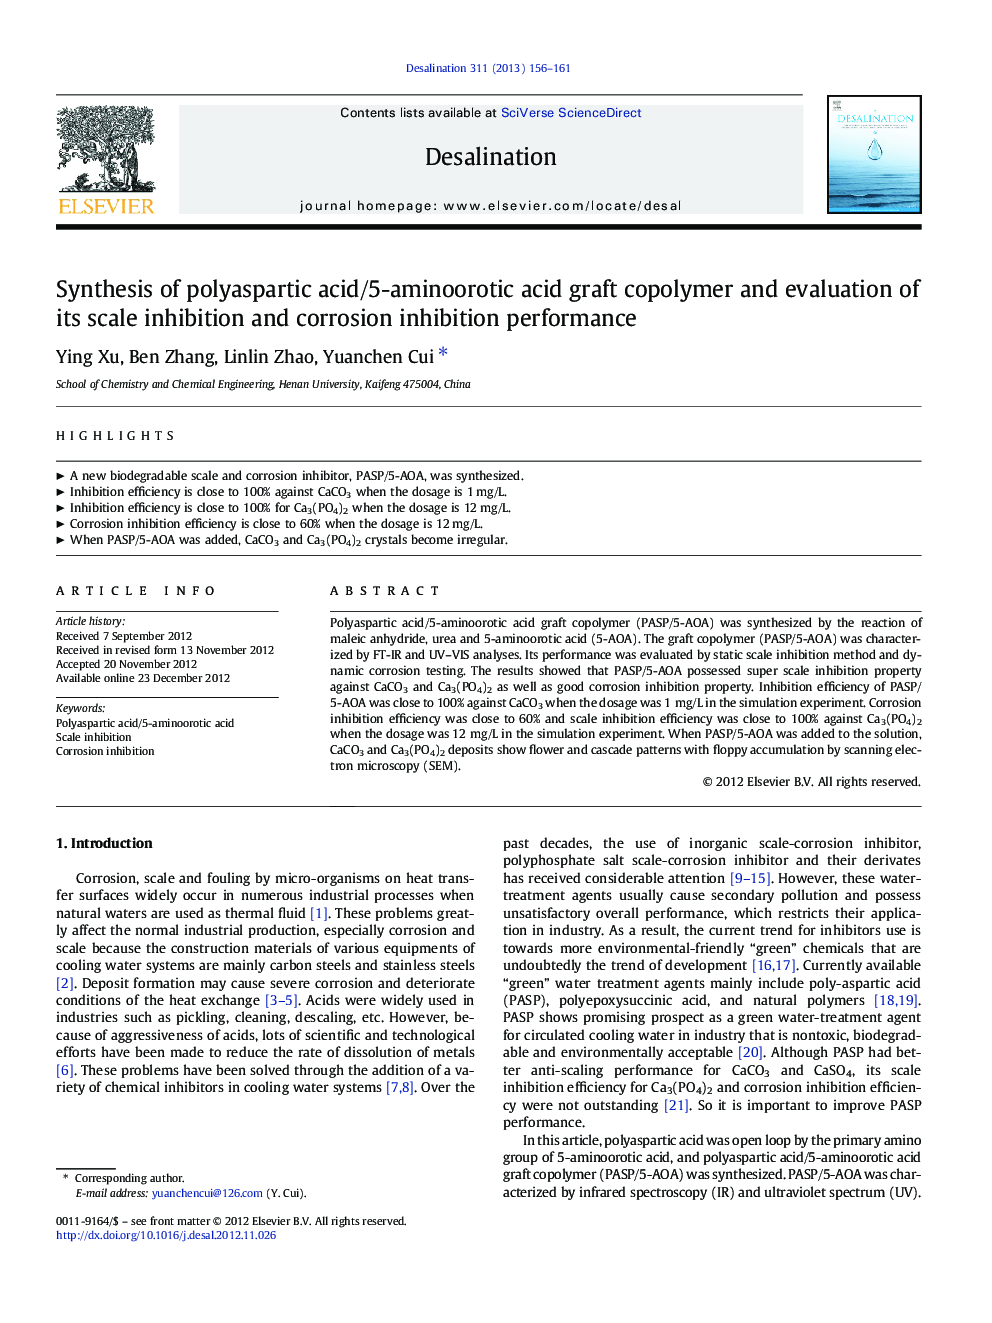 Synthesis of polyaspartic acid/5-aminoorotic acid graft copolymer and evaluation of its scale inhibition and corrosion inhibition performance